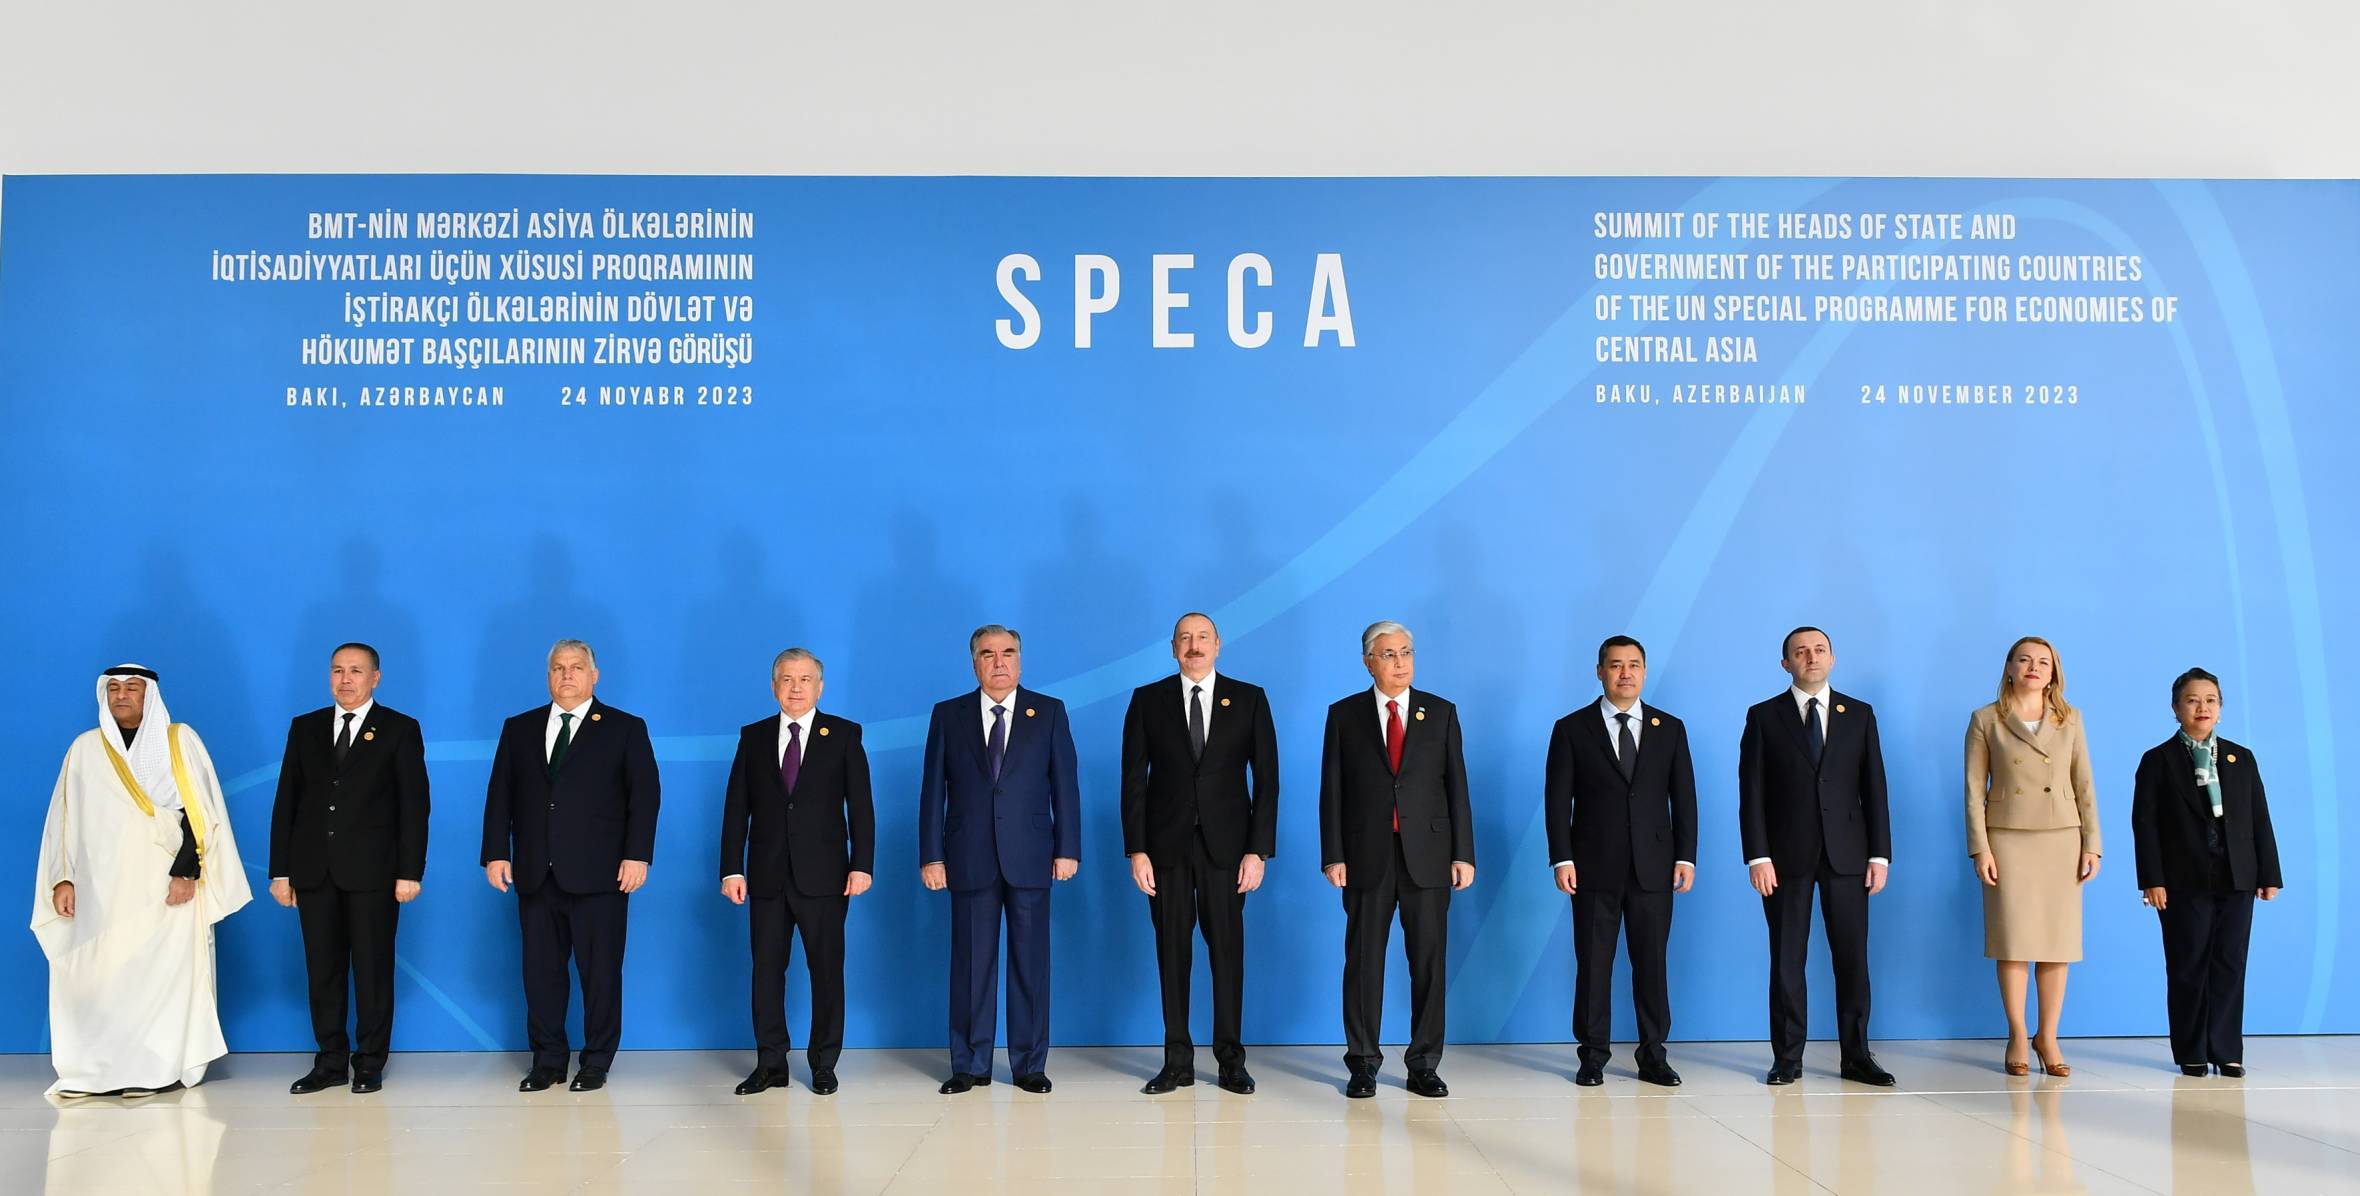 Ilham Aliyev attended the Summit of UN Special Program for the Economies of Central Asia – SPECA